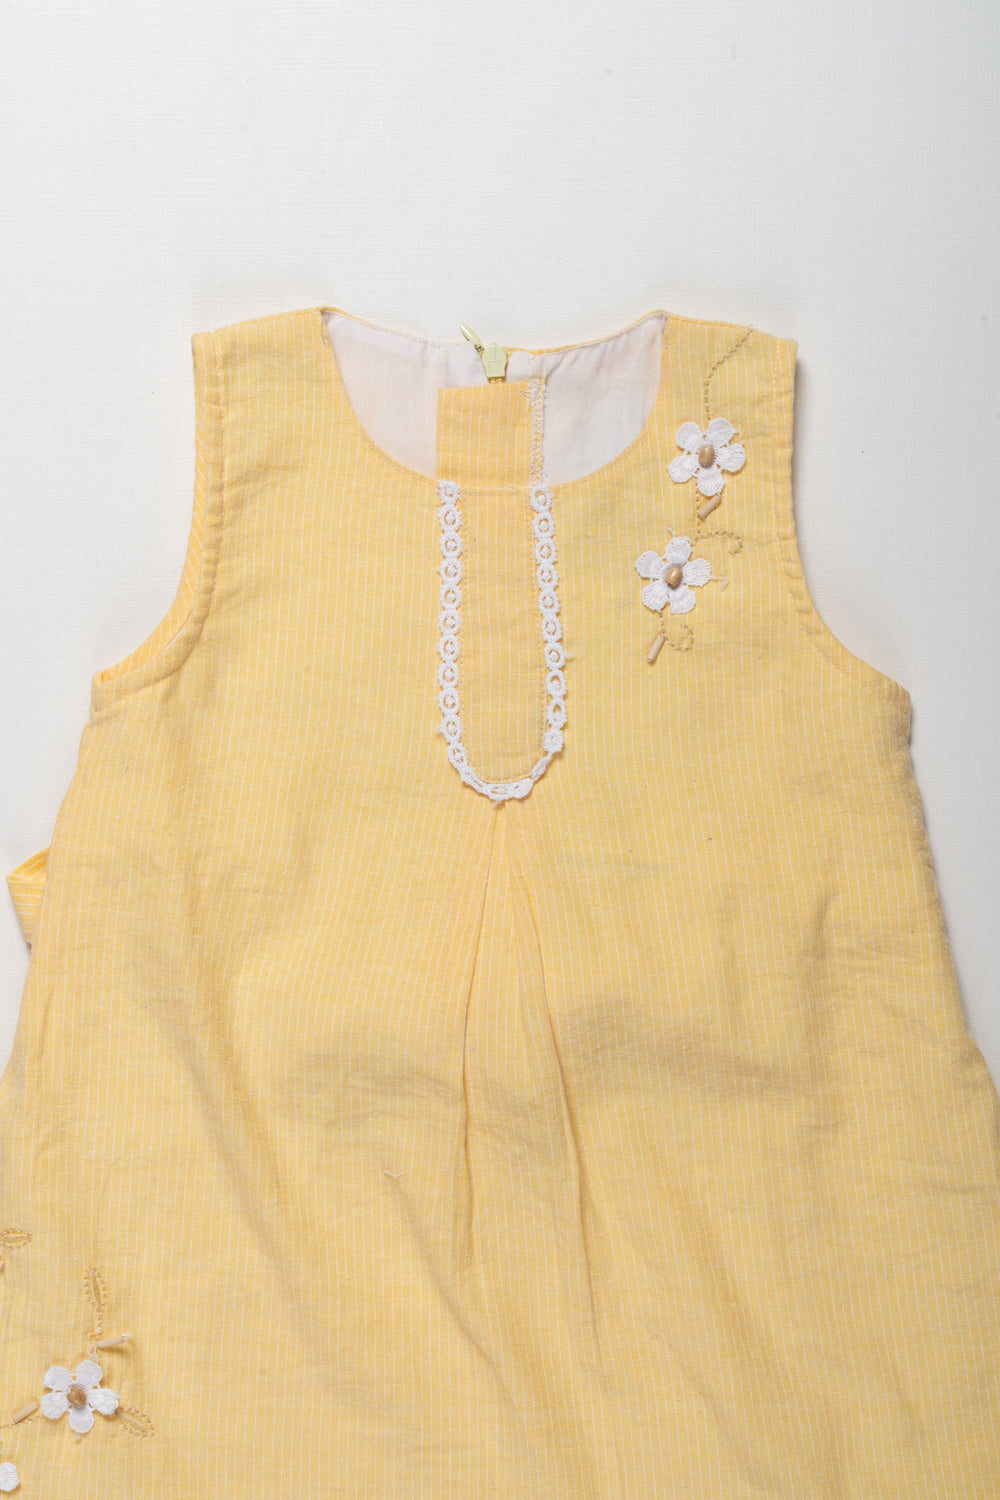 The Nesavu Baby Cotton Frocks Light Lemon Yellow Latest Lace Embroidered Cotton Gown For New Born Infants Nesavu Kids Summer Comfy Wear Collection Online | Baby Girls Gown Ideas | The Nesavu